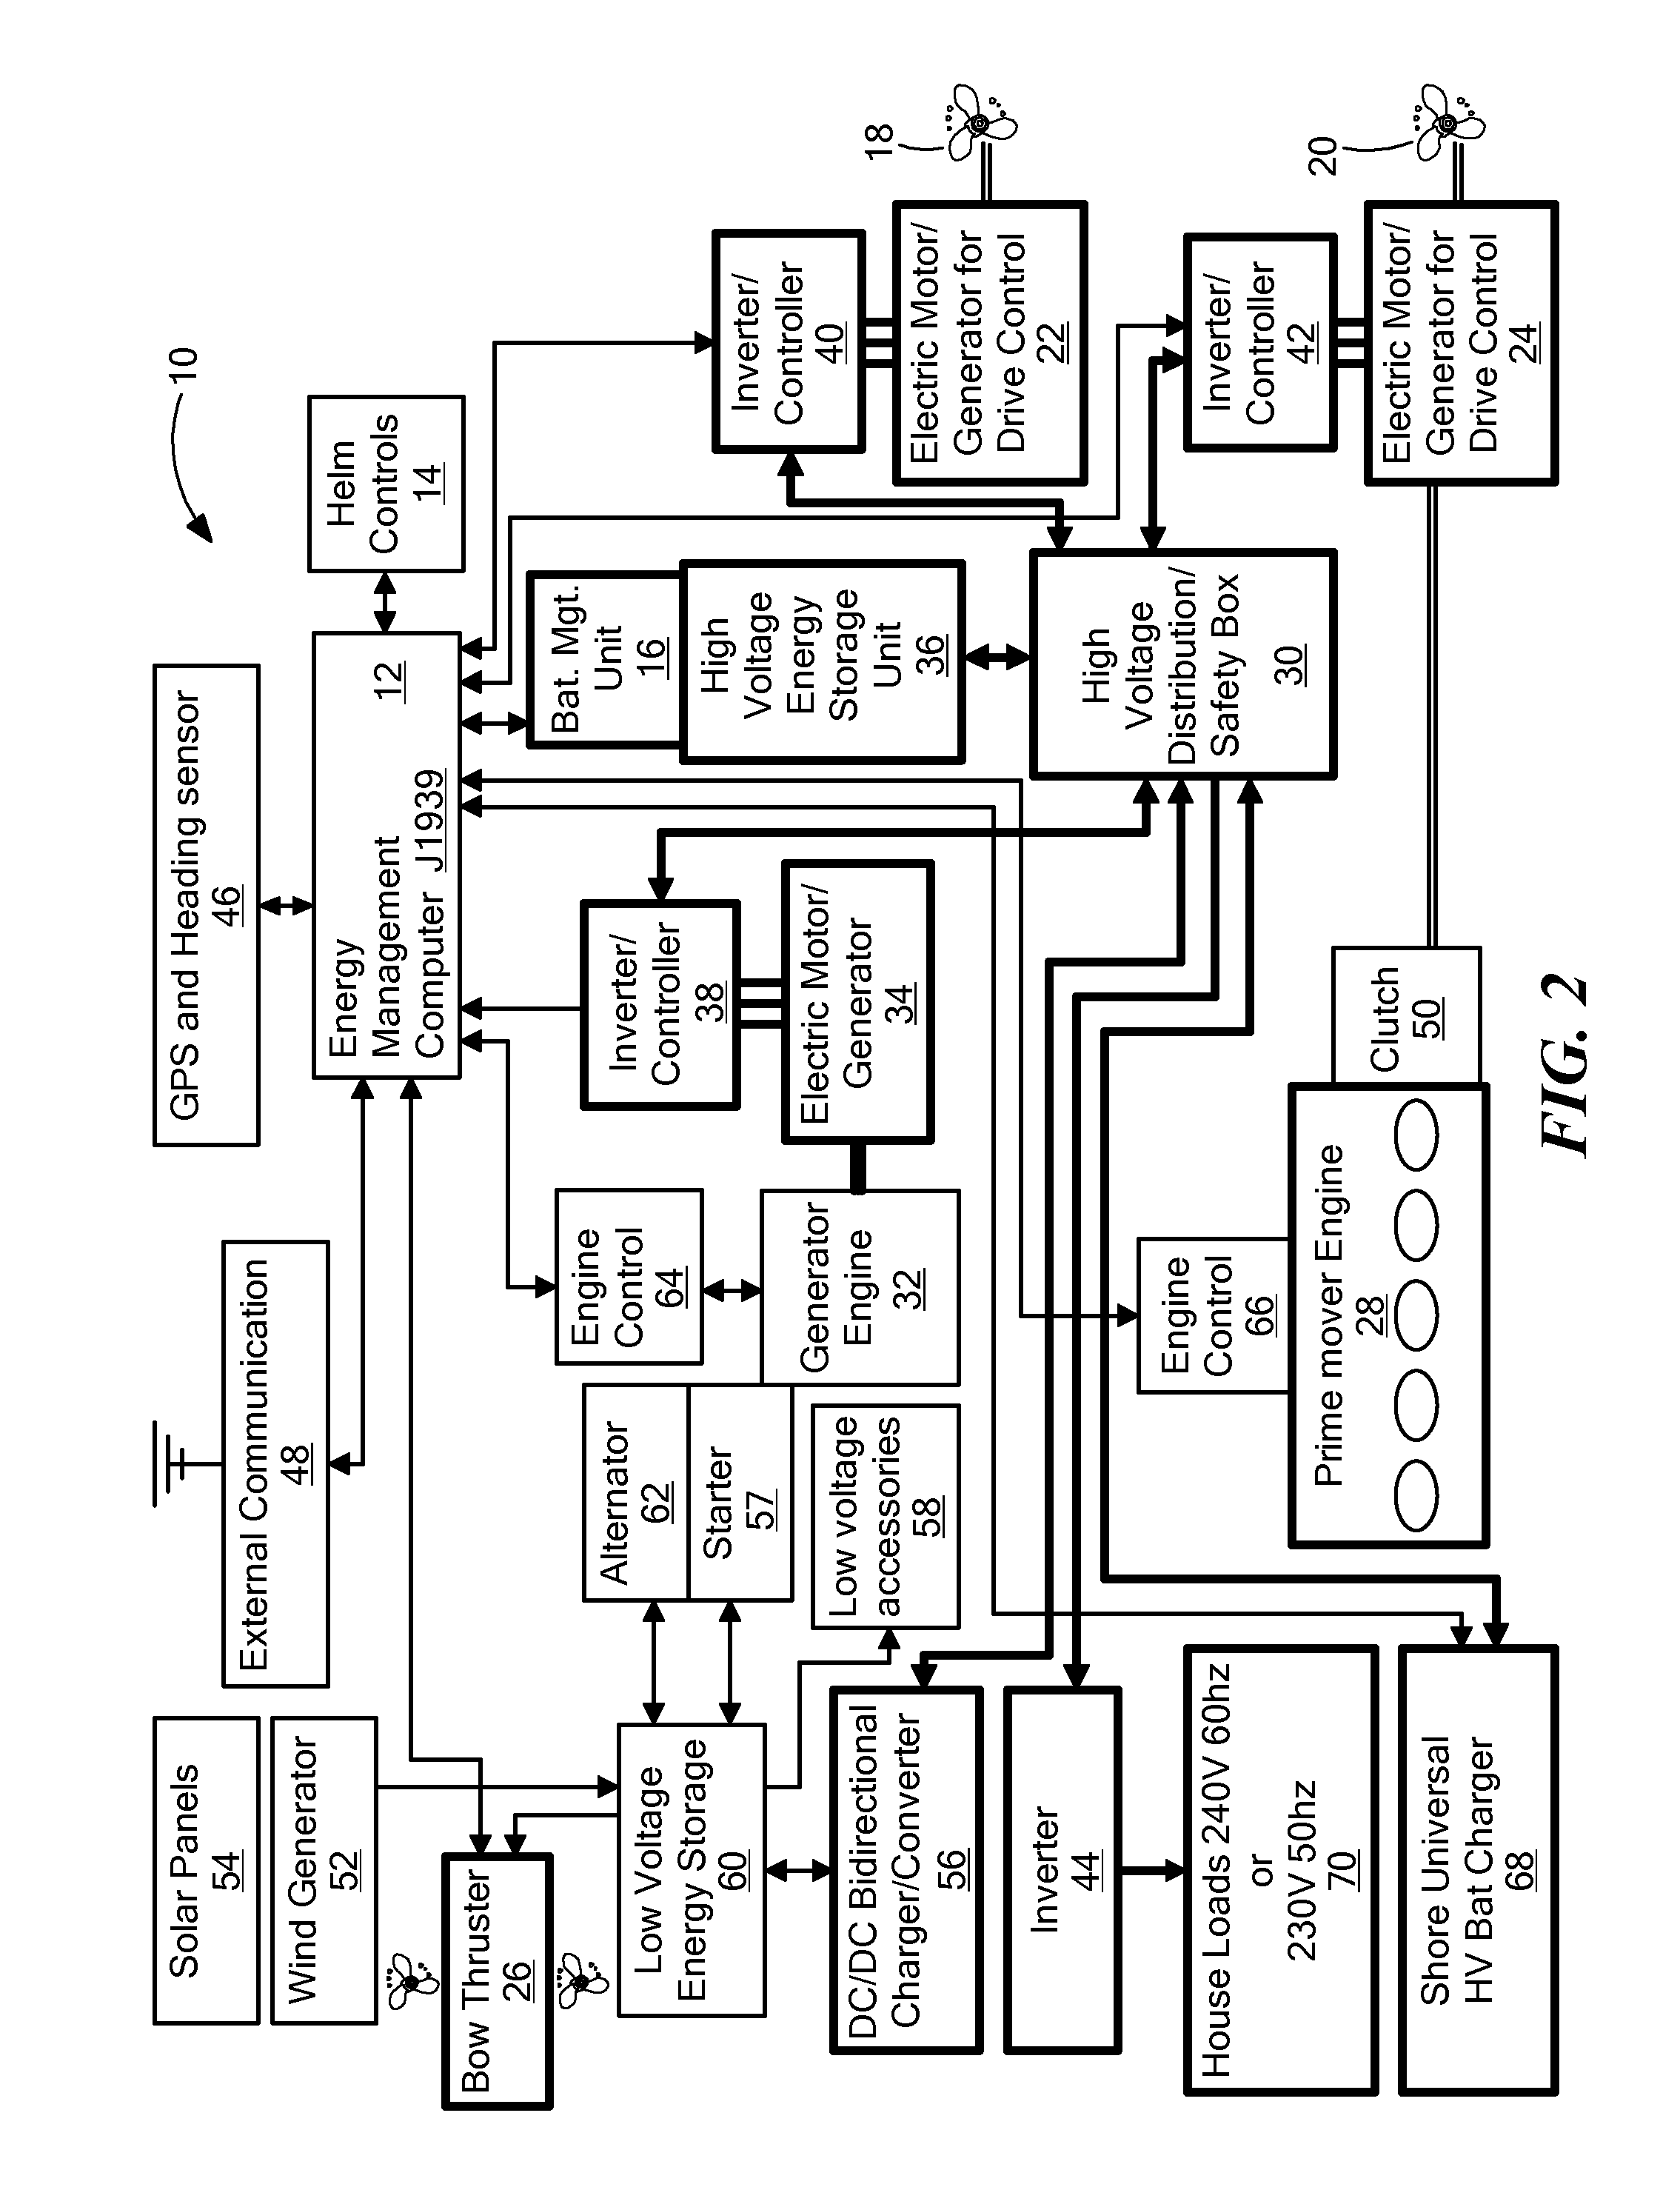 Electronic system and method of automating, controlling, and optimizing the operation of one or more energy storage units and a combined serial and parallel hybrid marine propulsion system